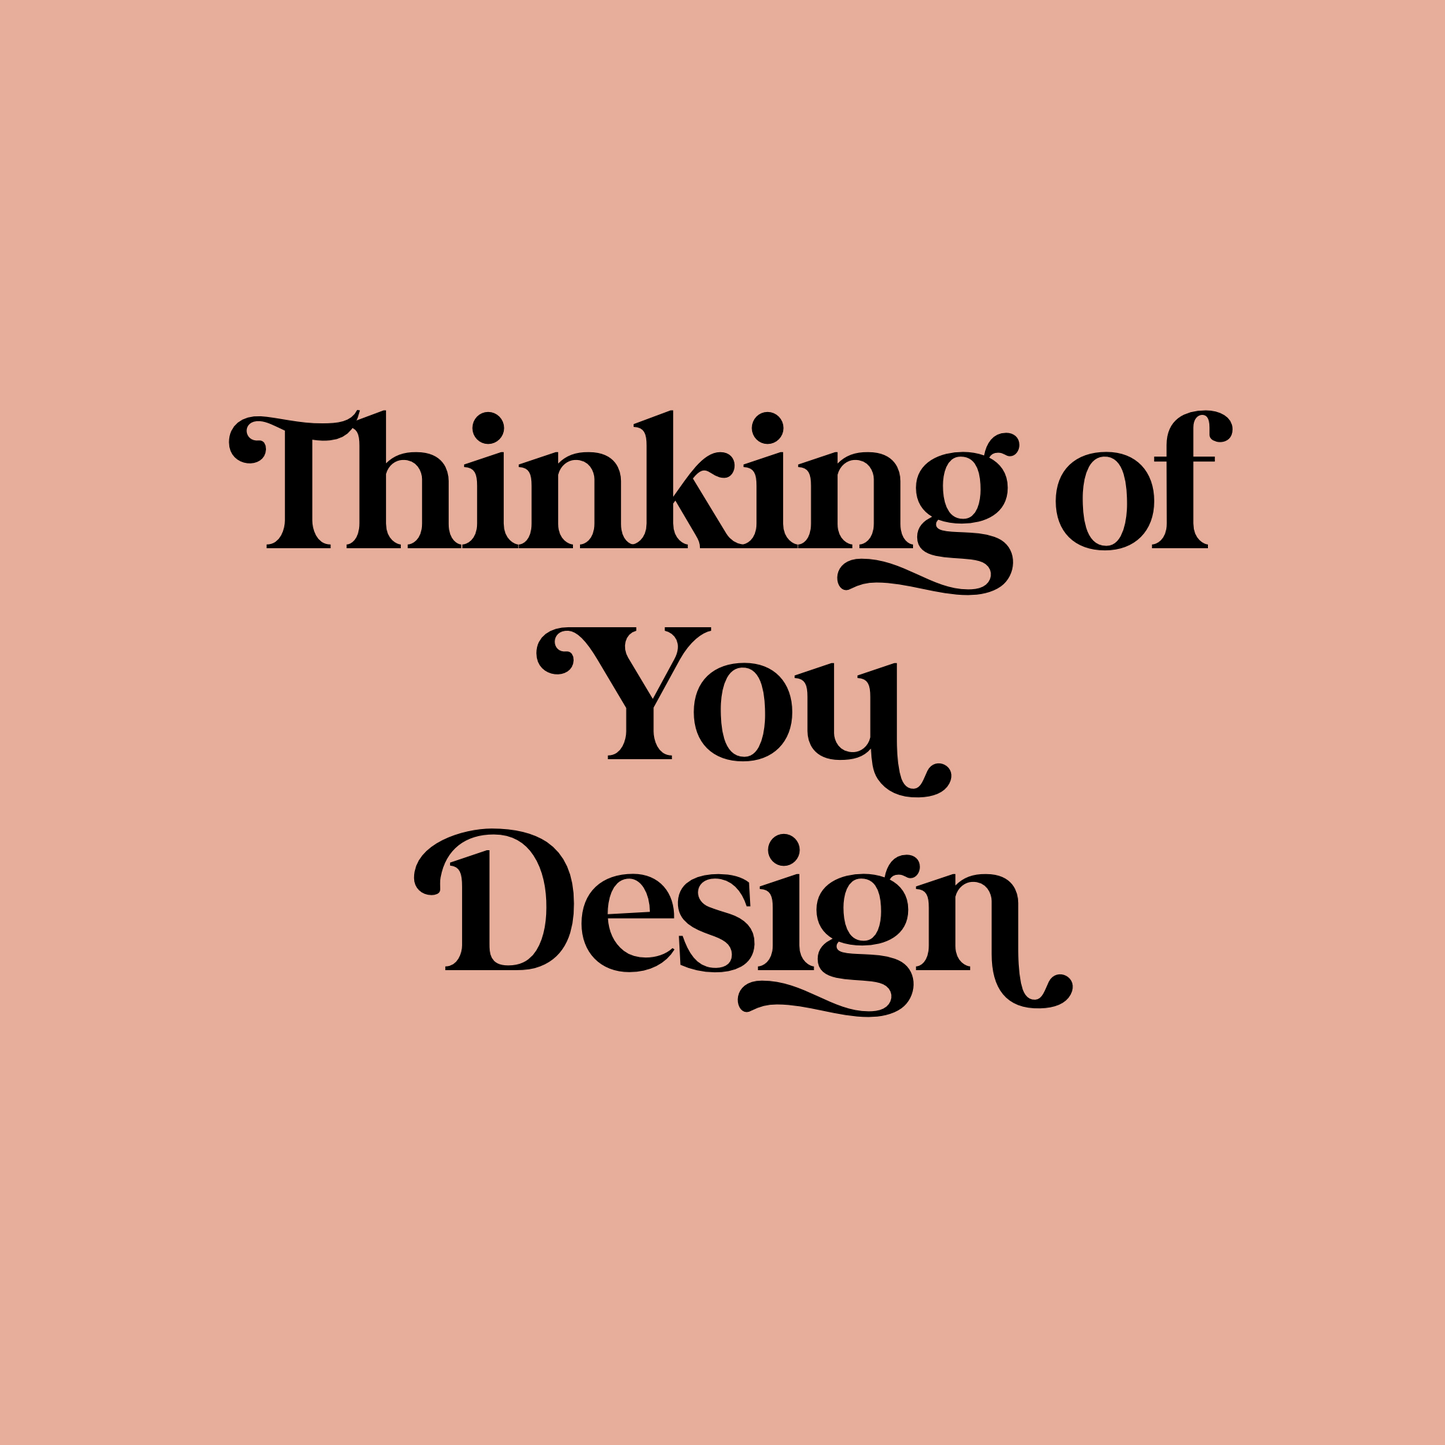 Thinking of You Design